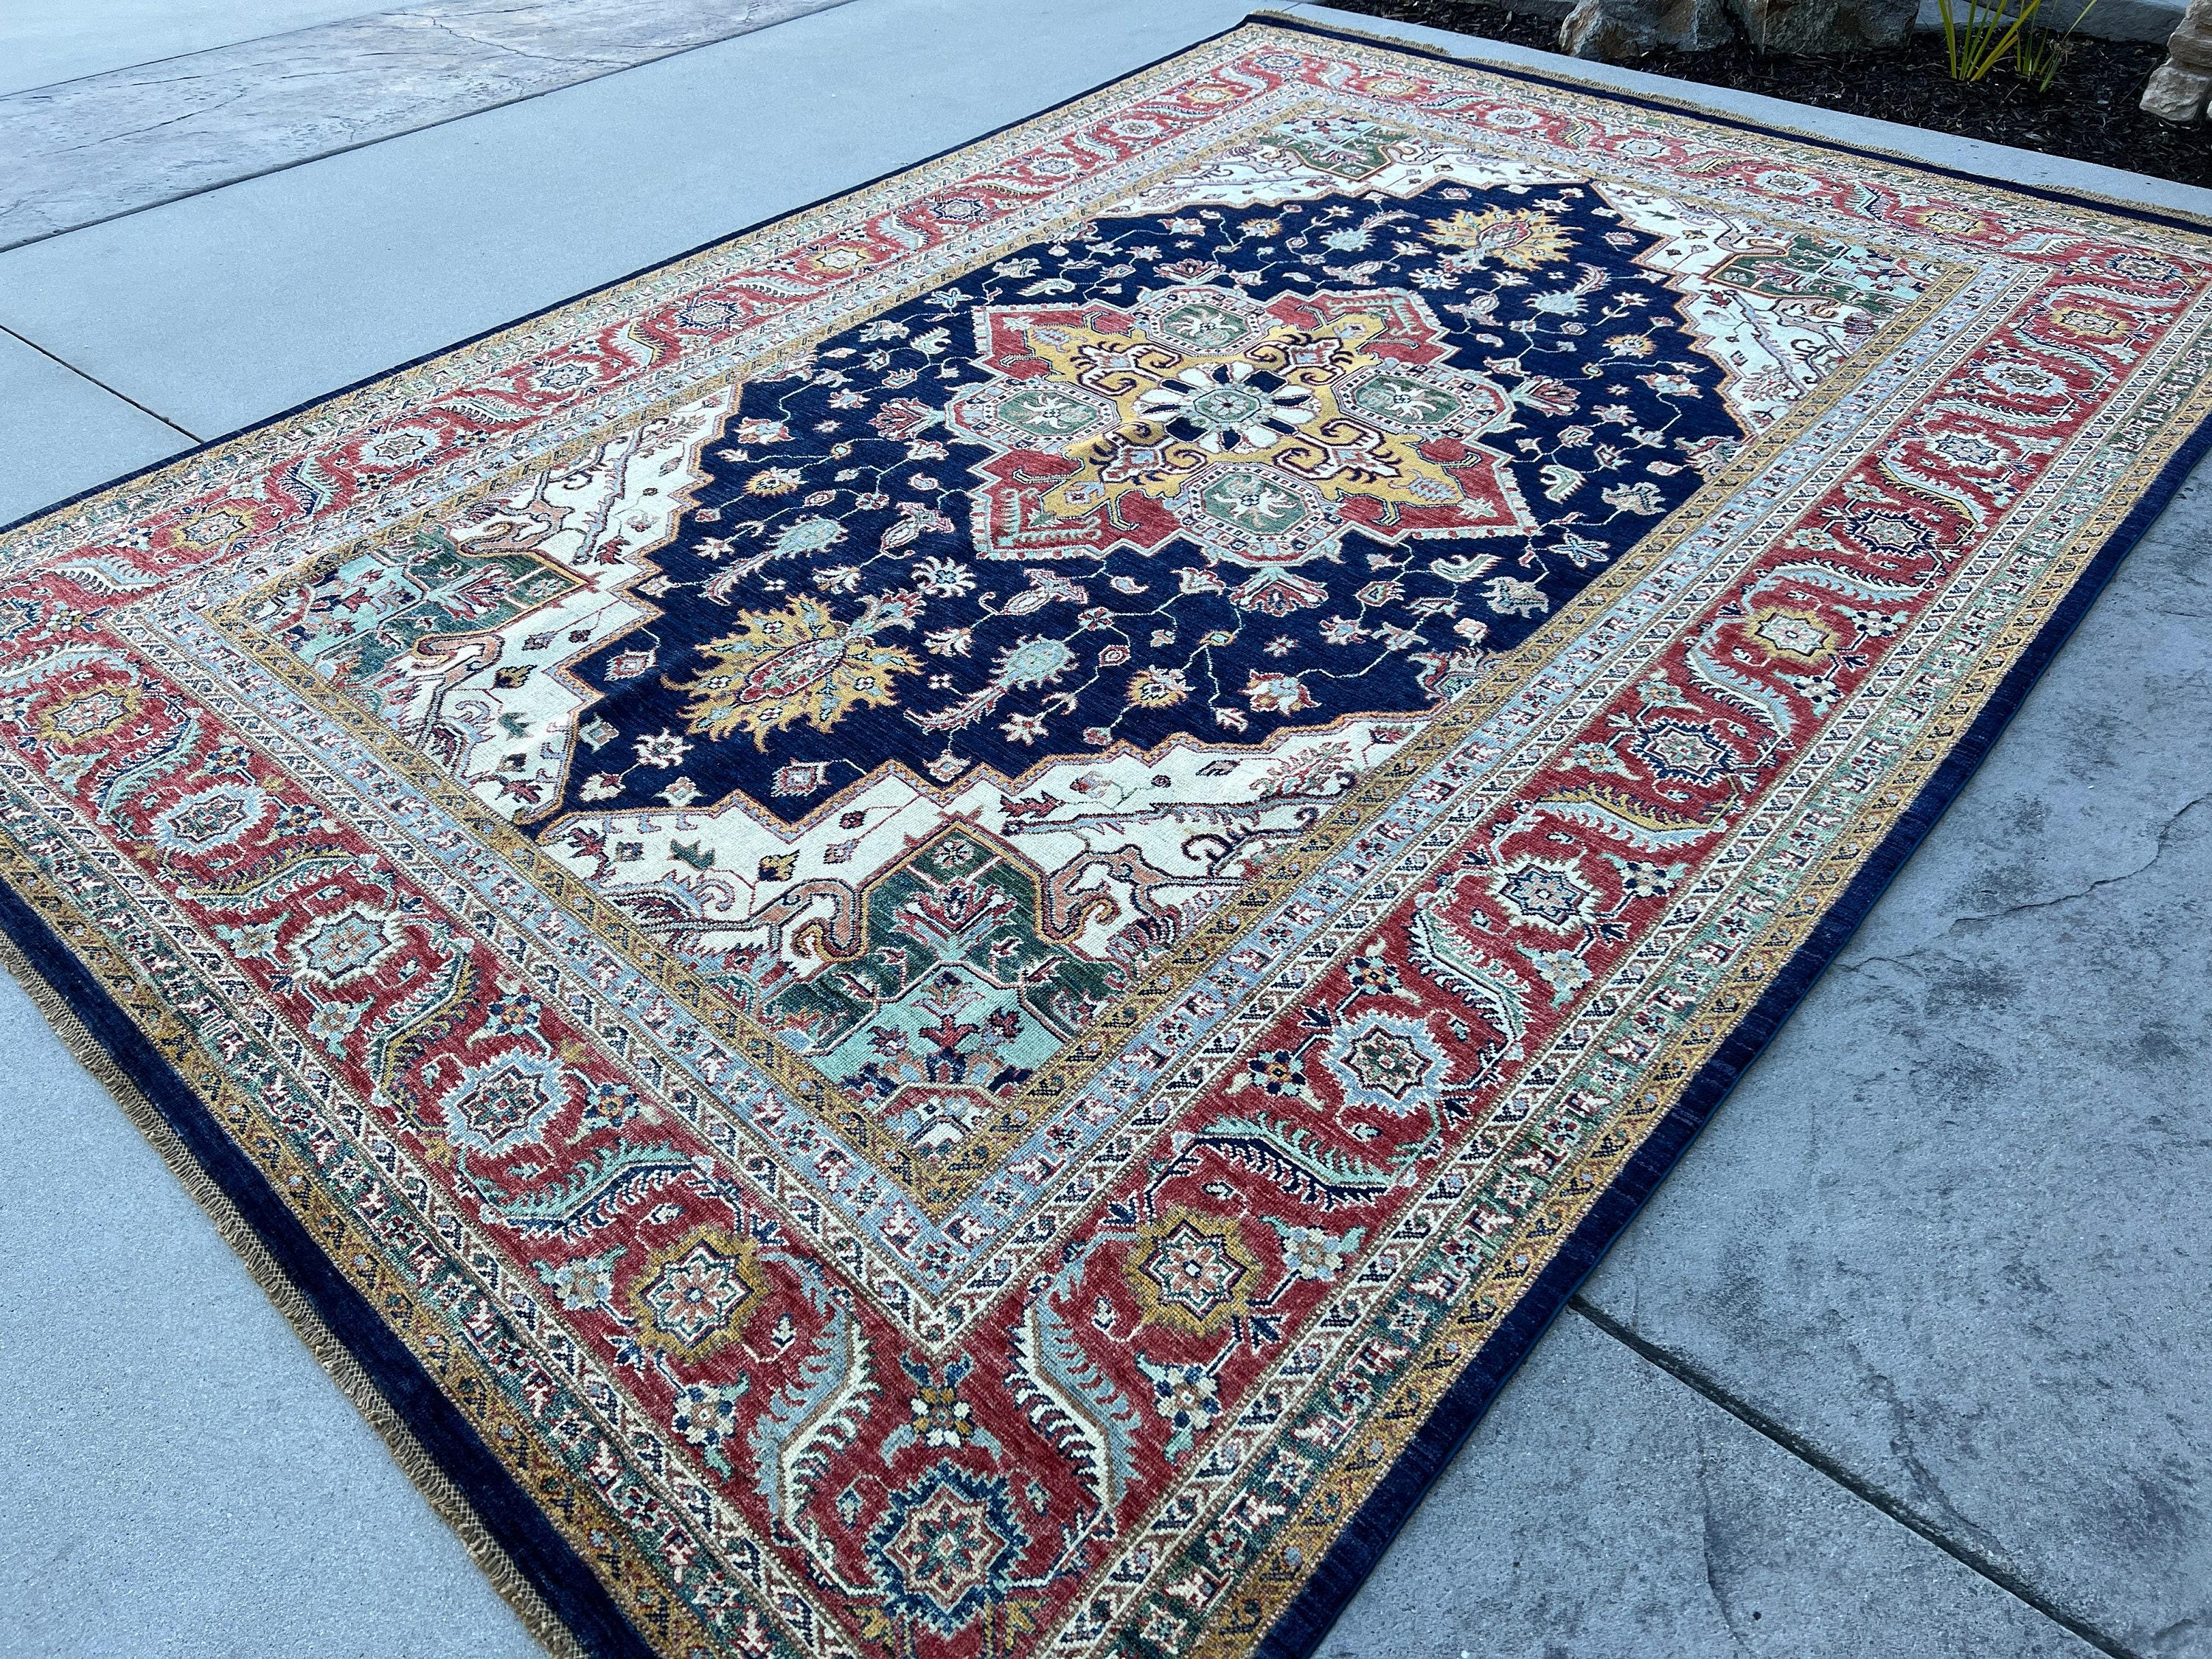 Hand-Knotted Afghan Heriz Rug Premium Hand-Spun Afghan Wool Fair Trade In New Condition For Sale In San Marcos, CA